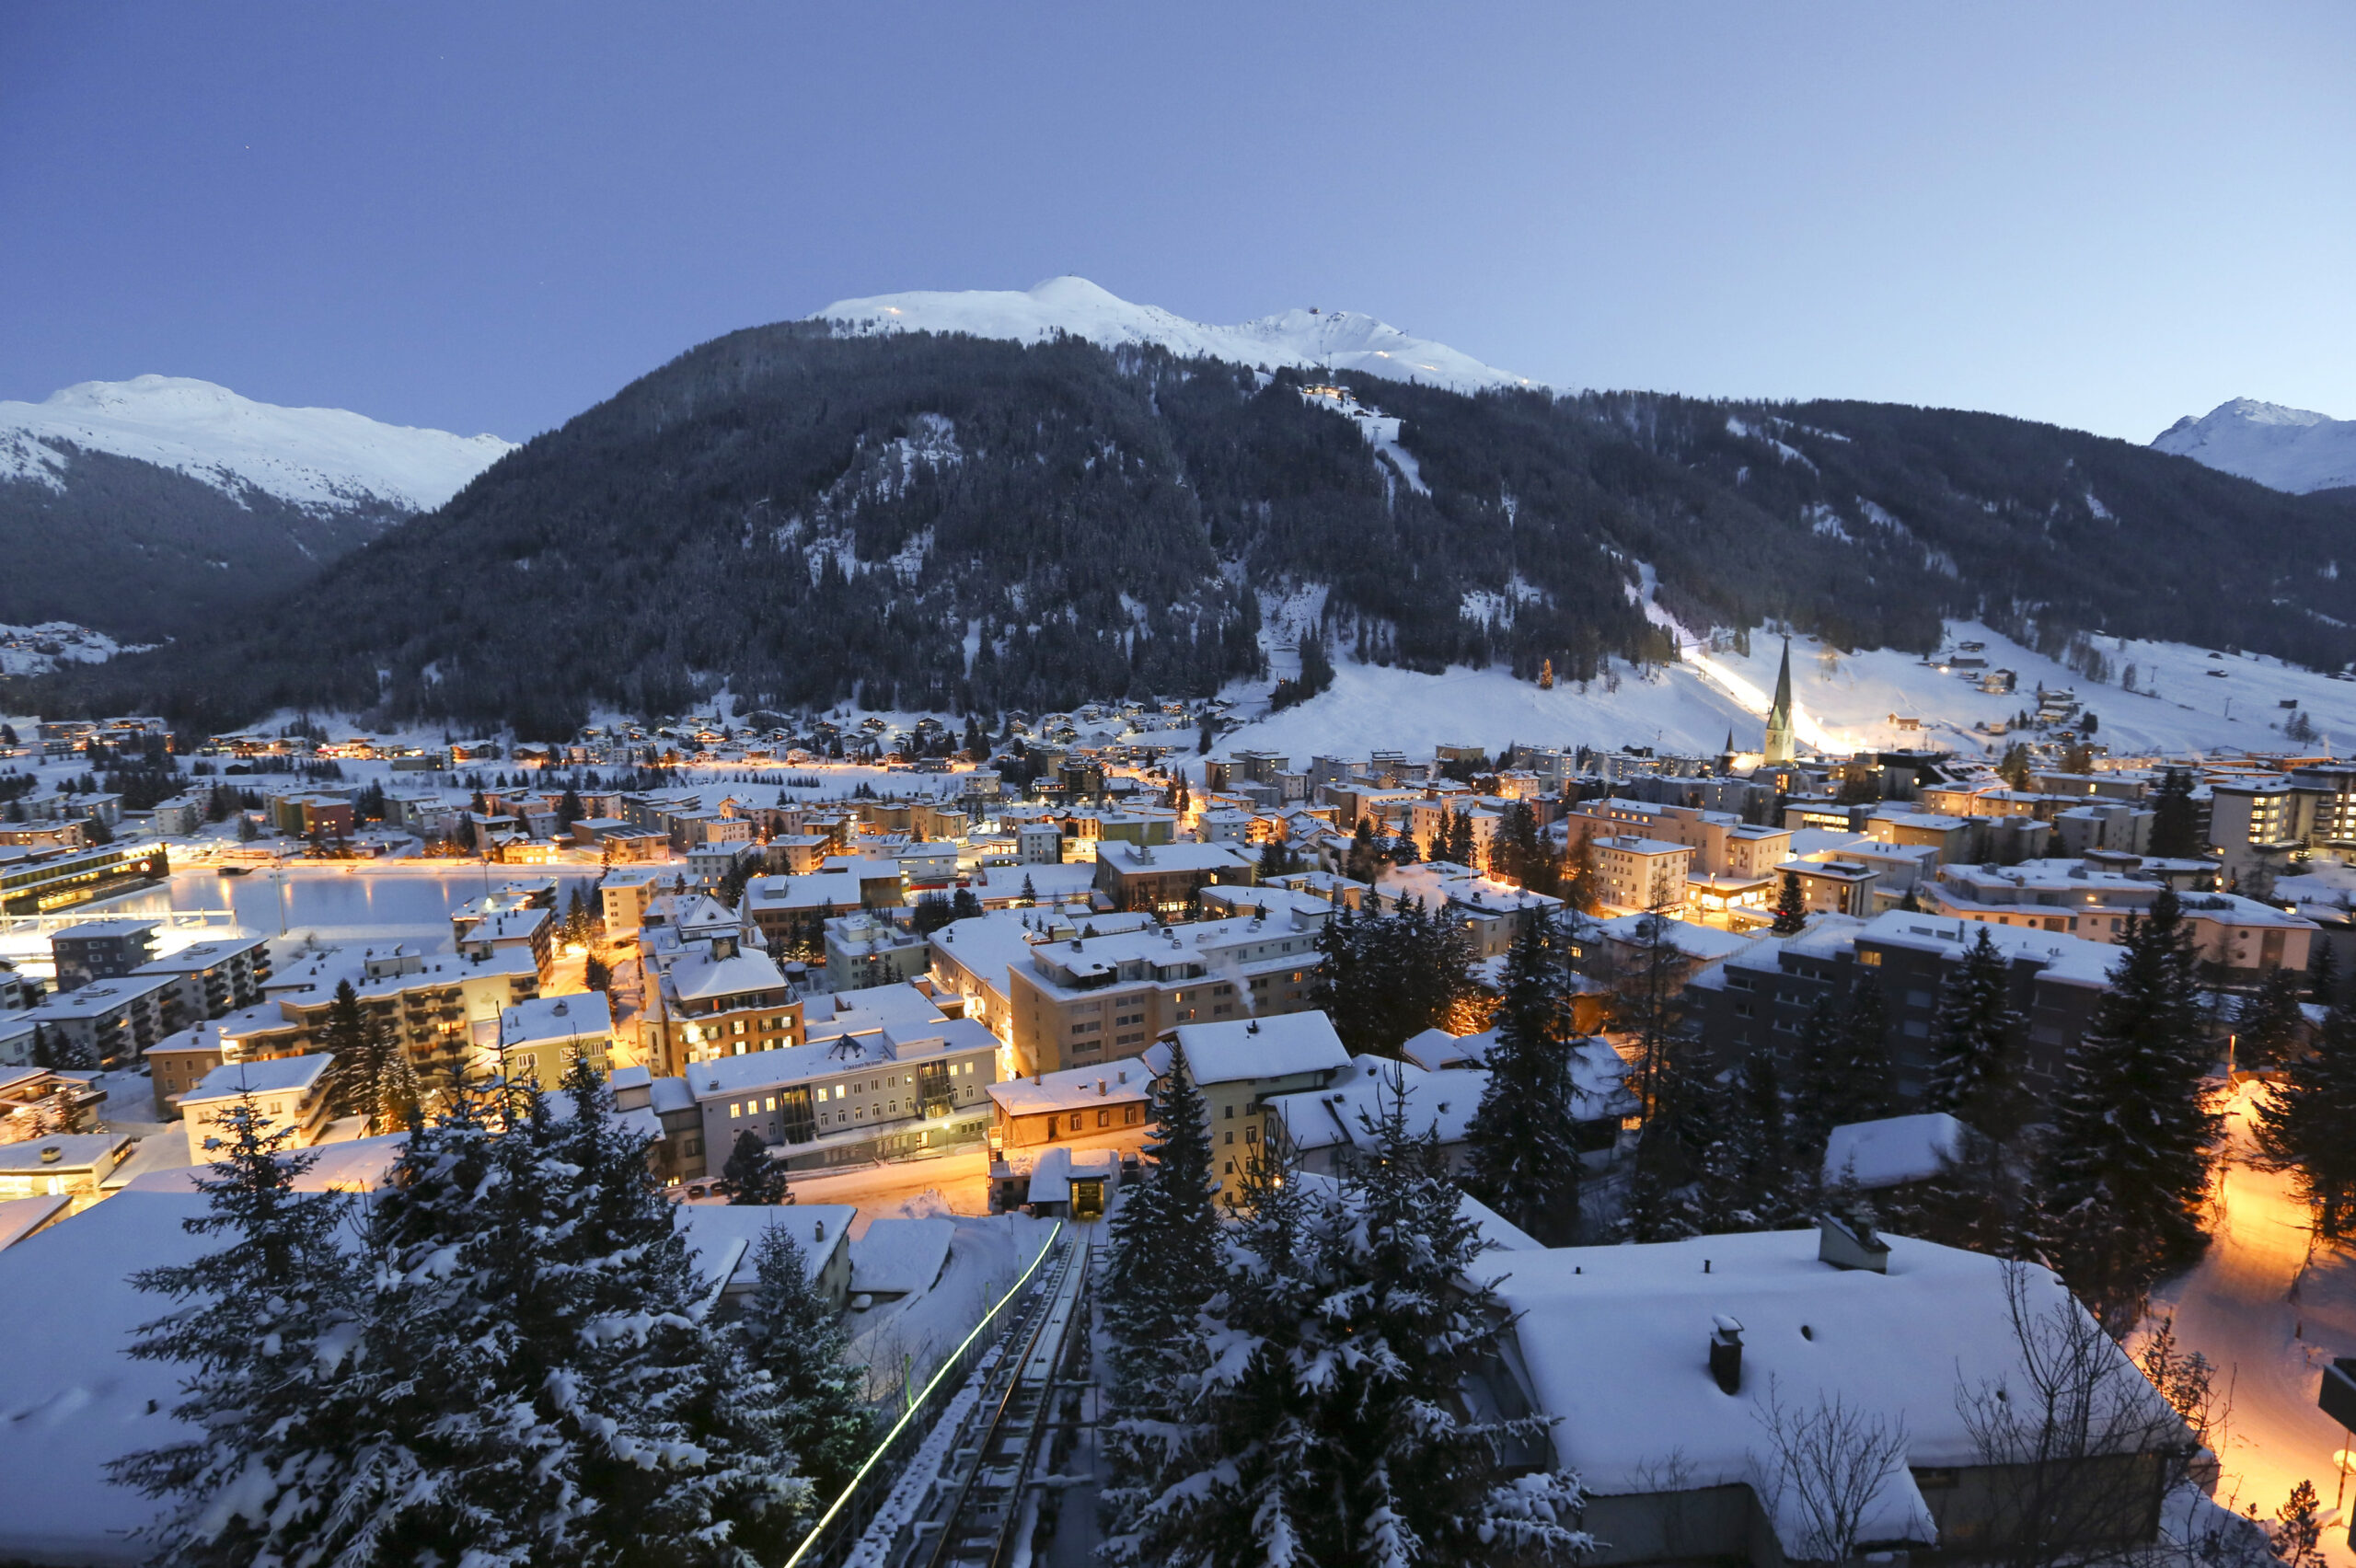 Uproar After Davos-Area Ski Town Bars Jews From Rentals